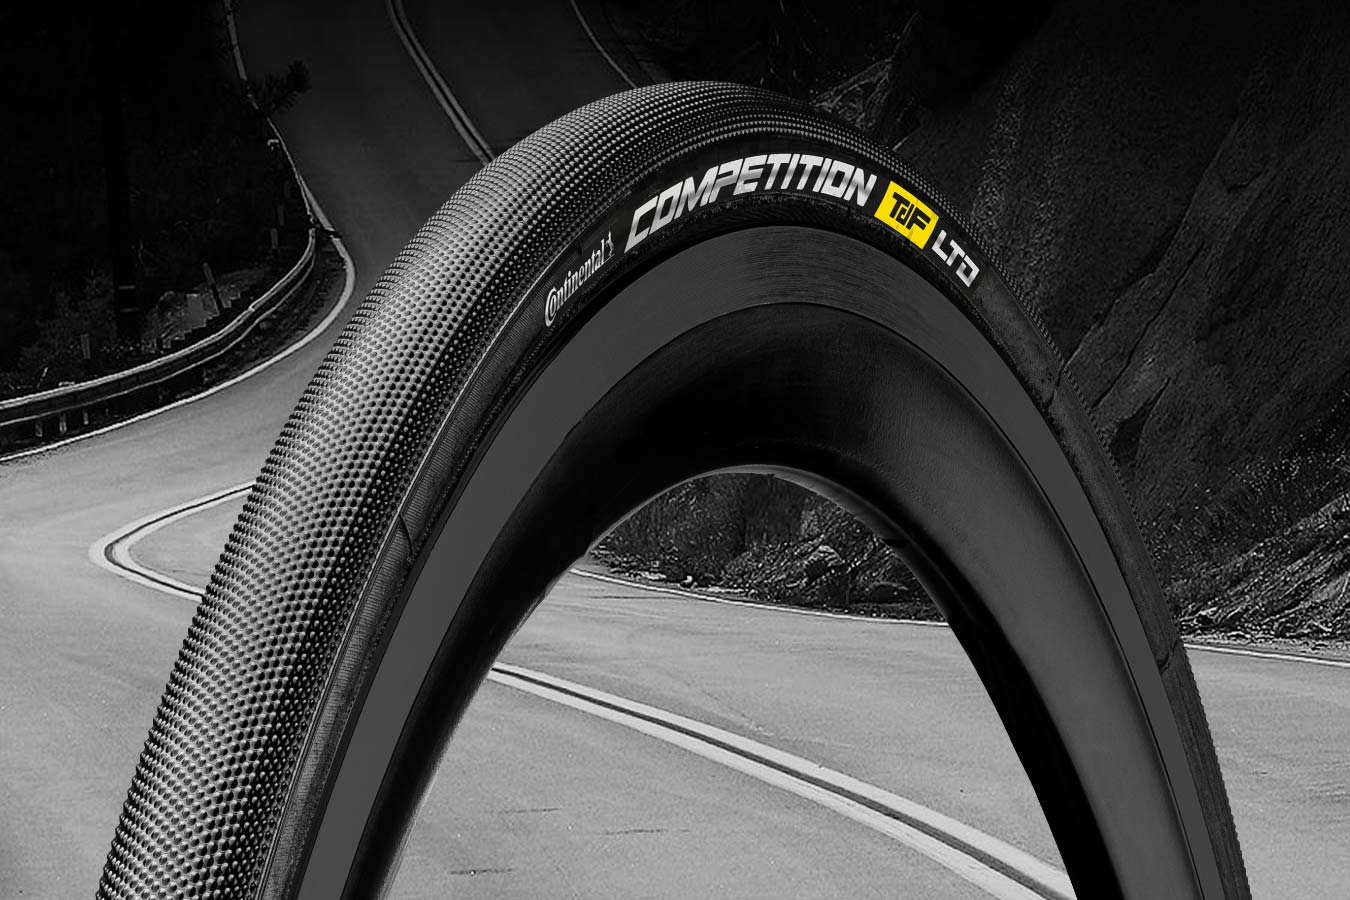 Continental Competition TdF LTD tires are as close as you’ll get to pro tubulars